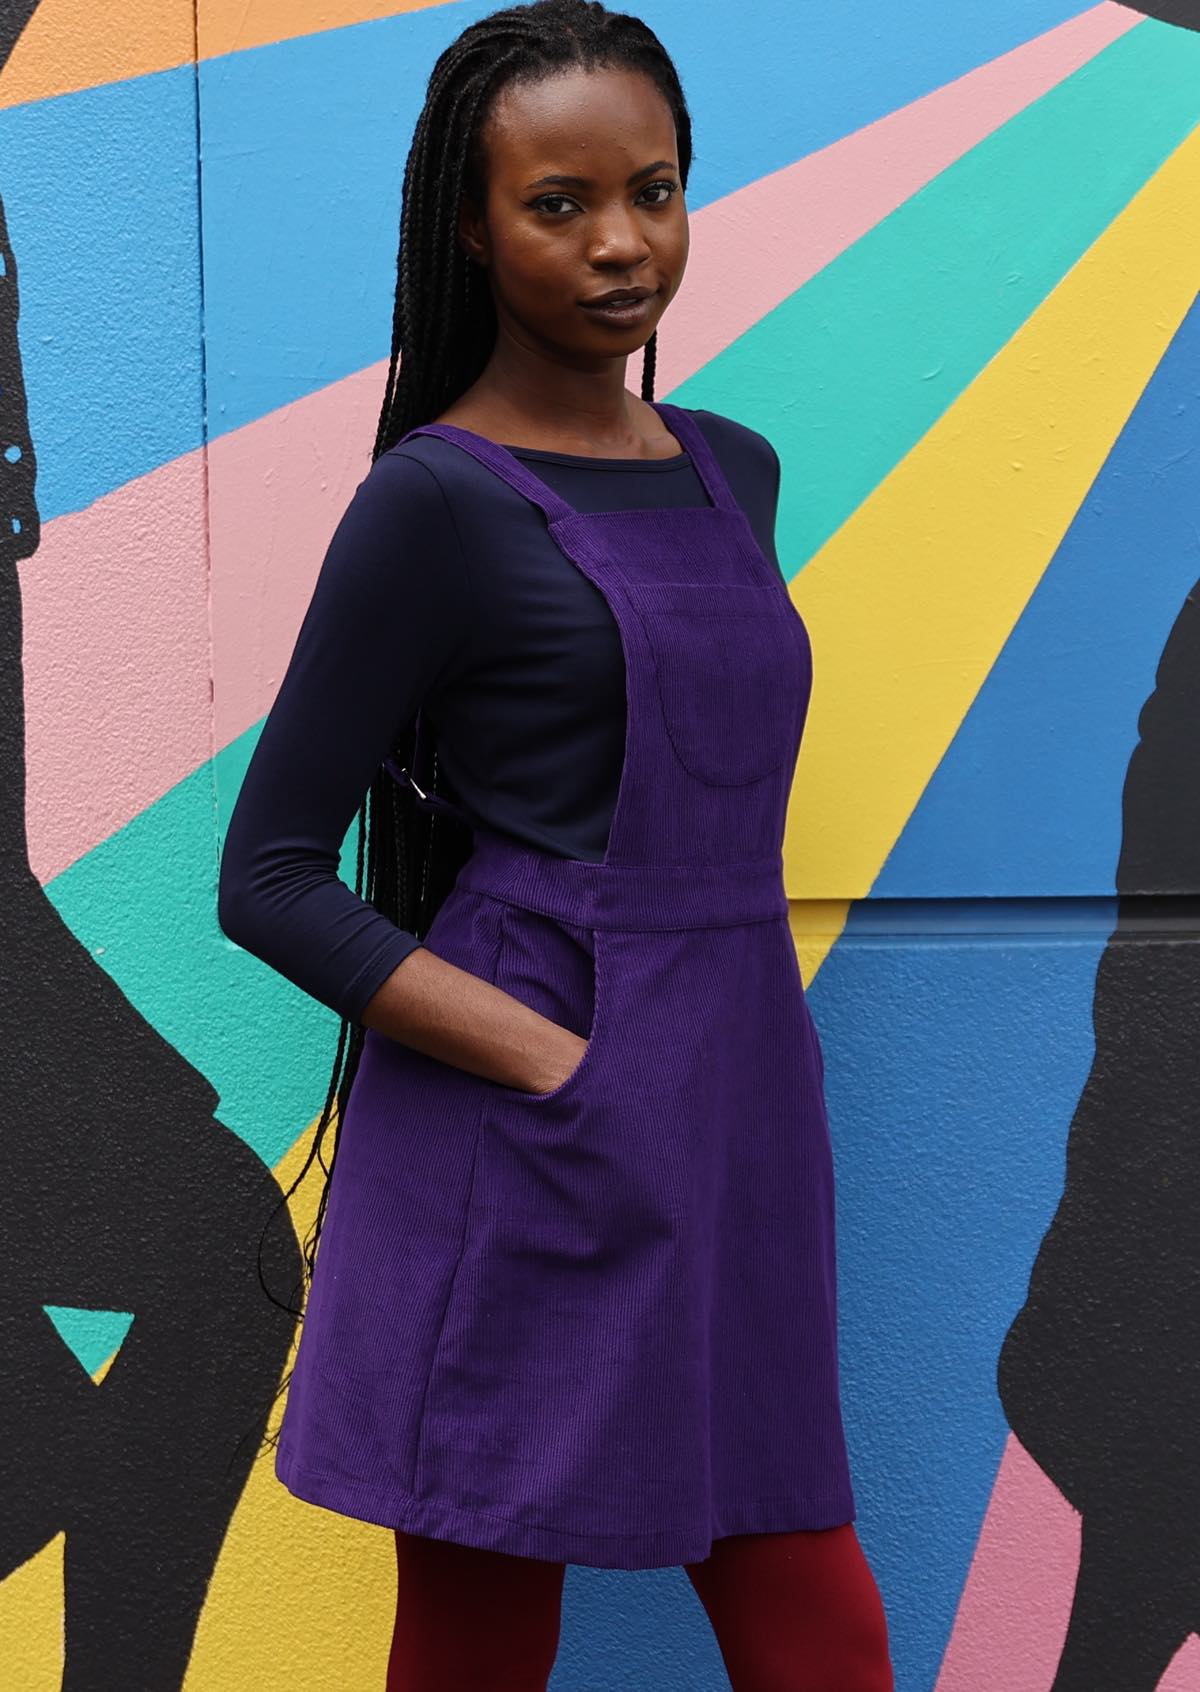 woman wearing purple cotton corduroy pinafore over navy blue top and maroon leggings 